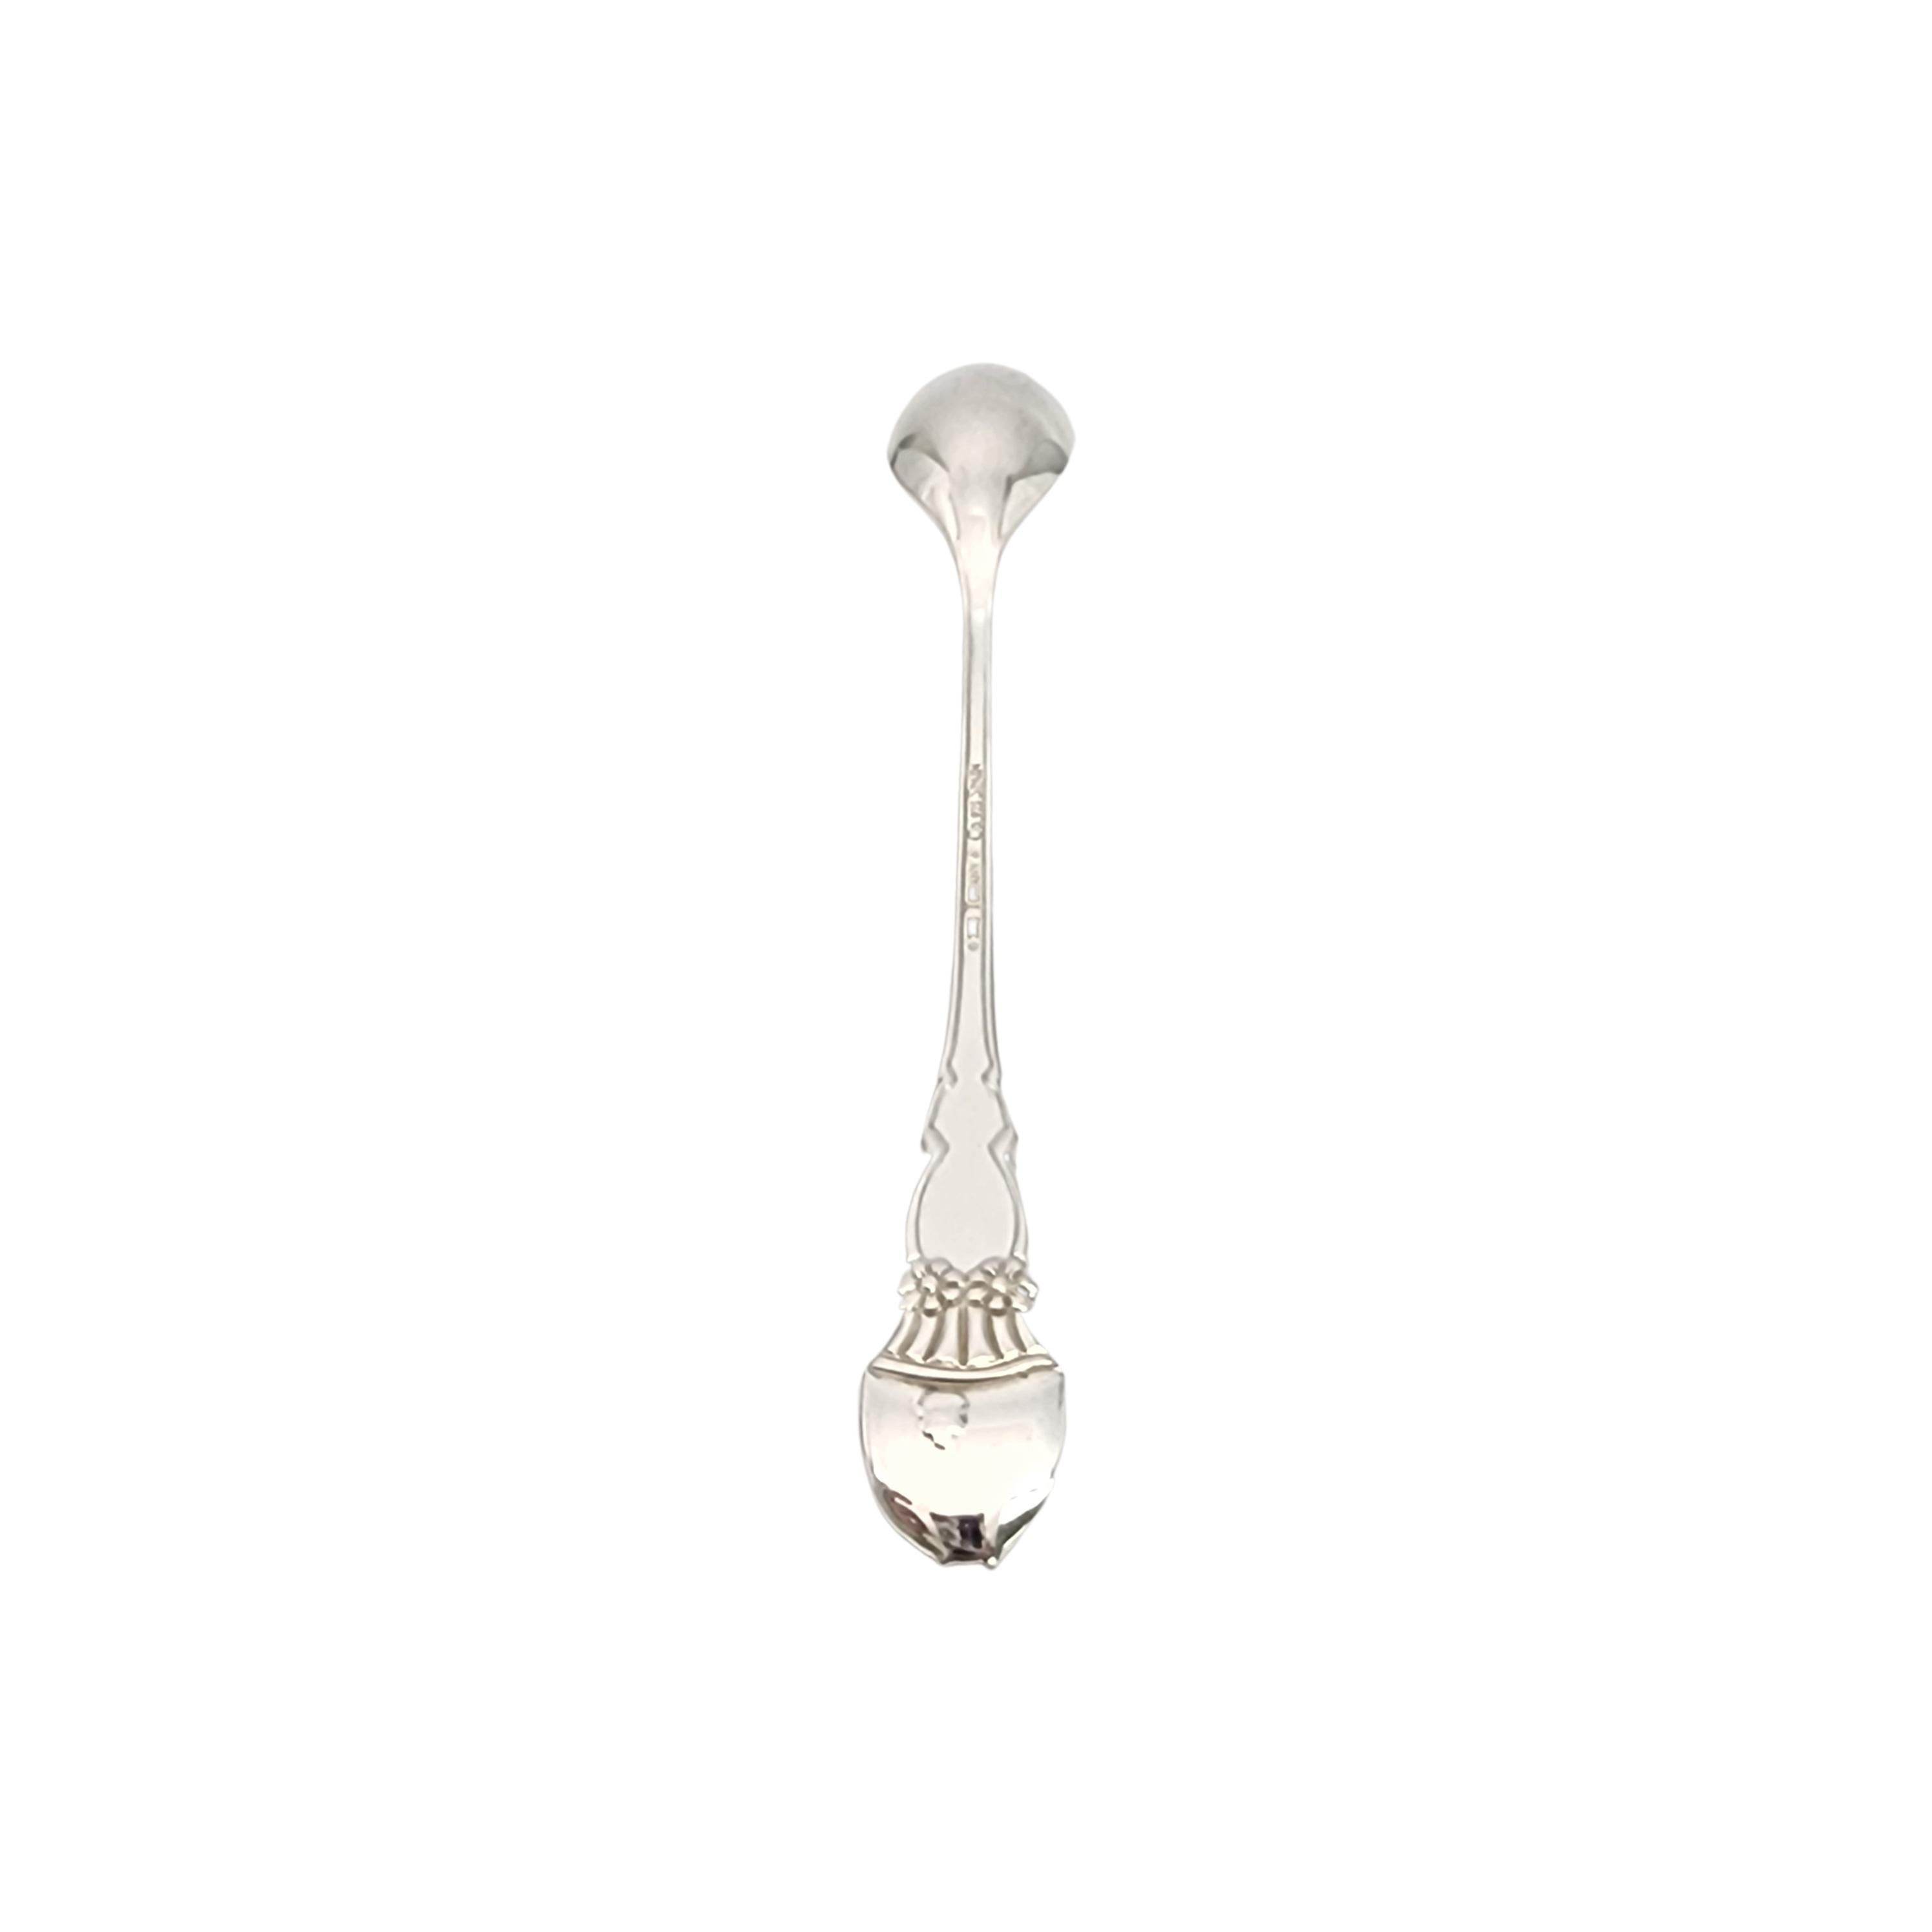 Tiffany & Co sterling silver Meadows baby feeding spoon with pouch.

Meadows is a simple and classic design featuring a a bunny rabbit and flowers with a bow on the front of the handle and a small bunny tail on top of the back of the handle. No